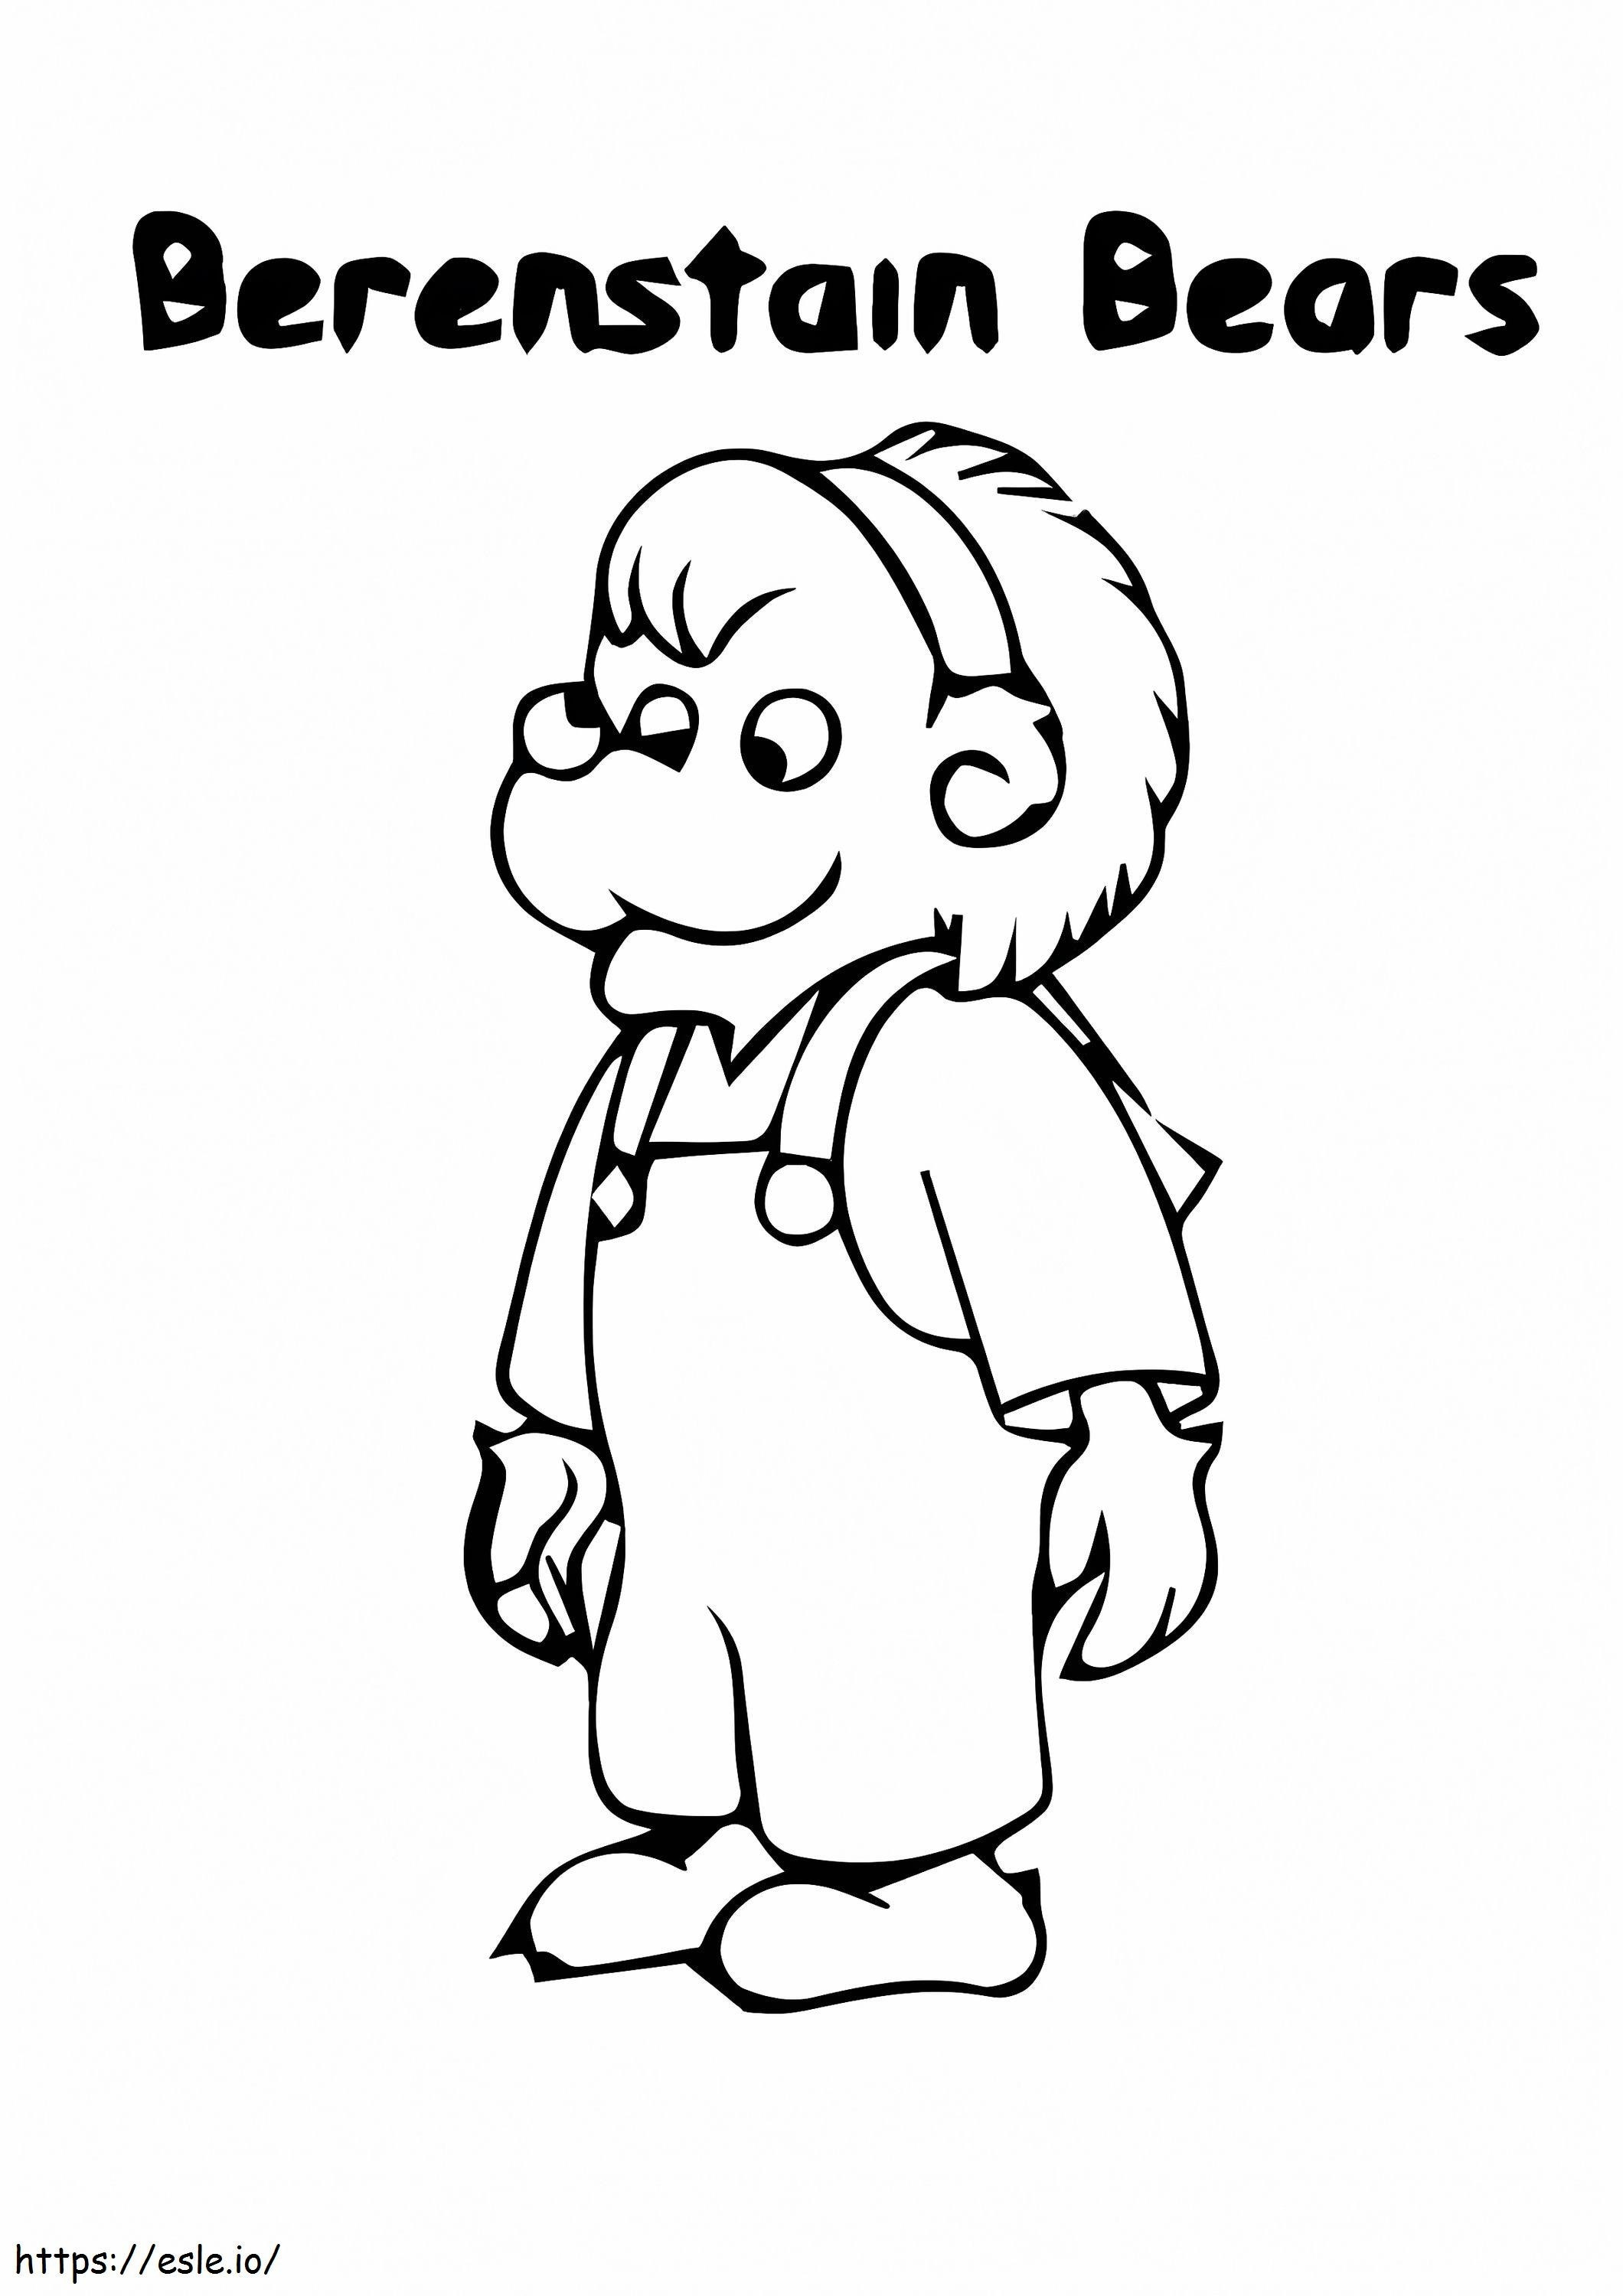 Berenstain Bears Smiling coloring page